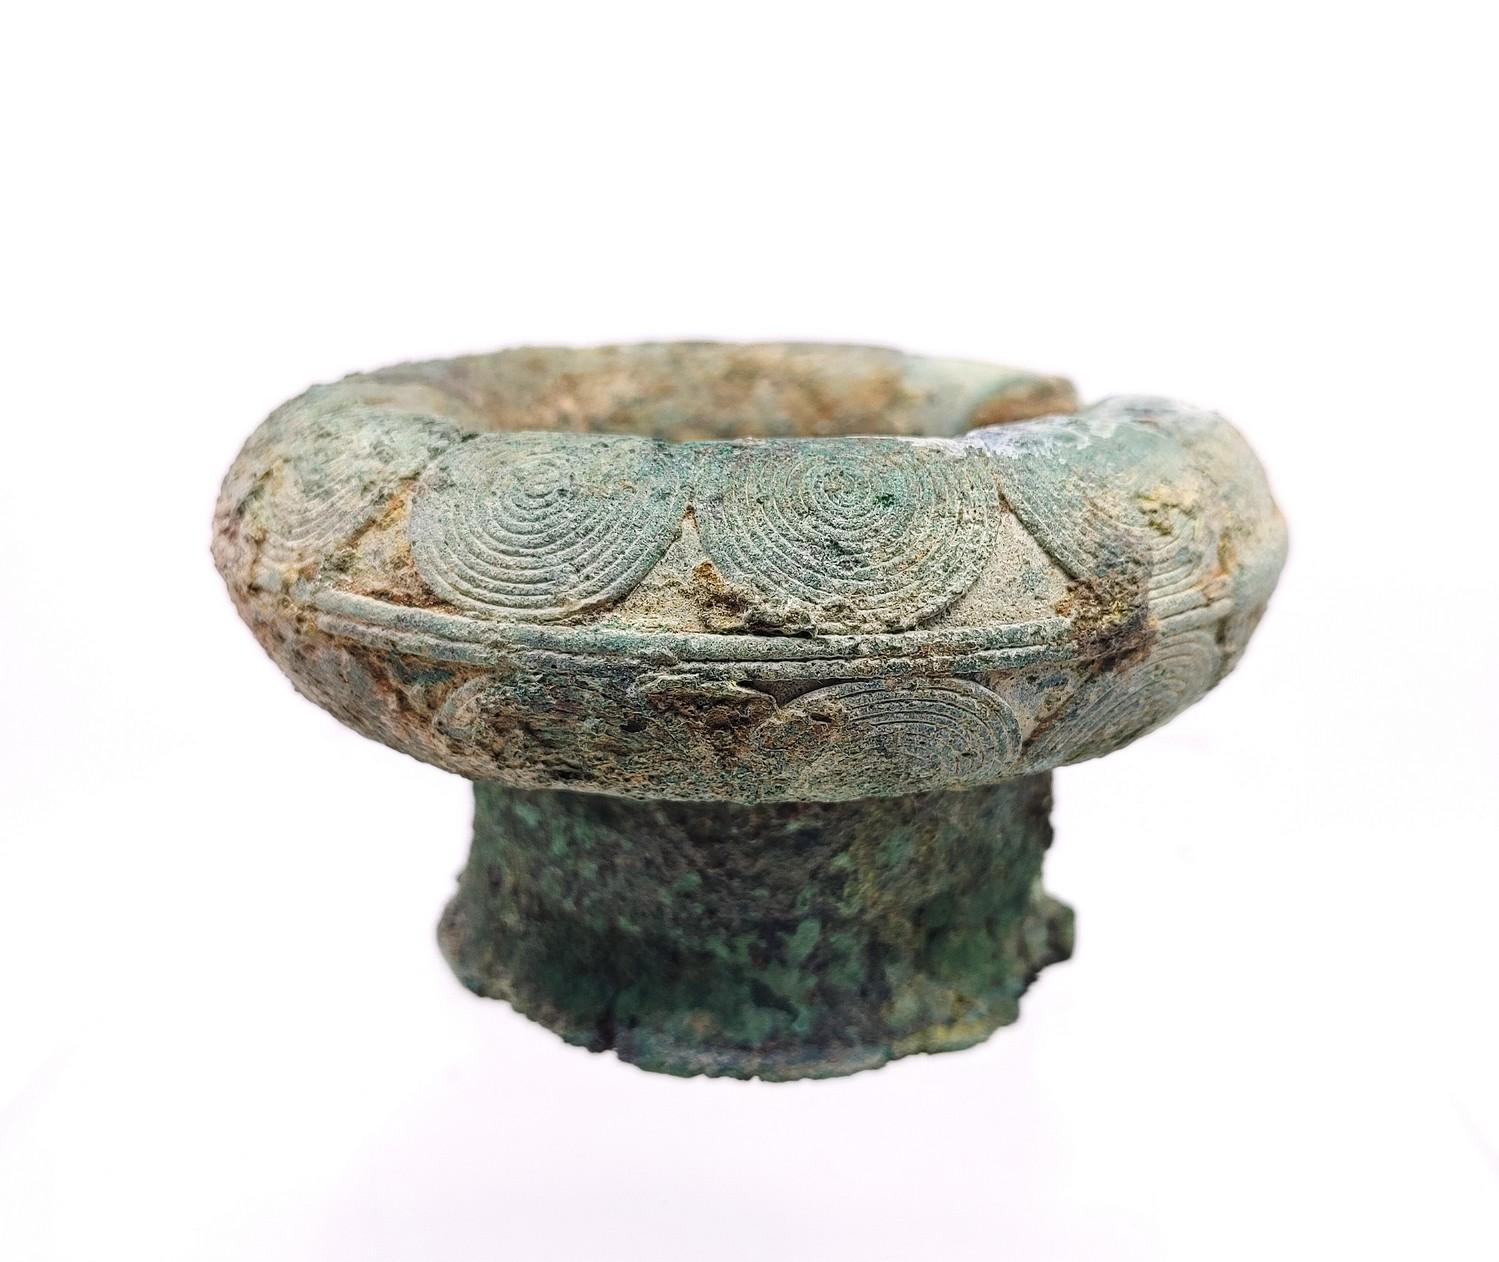 Dong Son Bronze Ancient Chariot Fittings